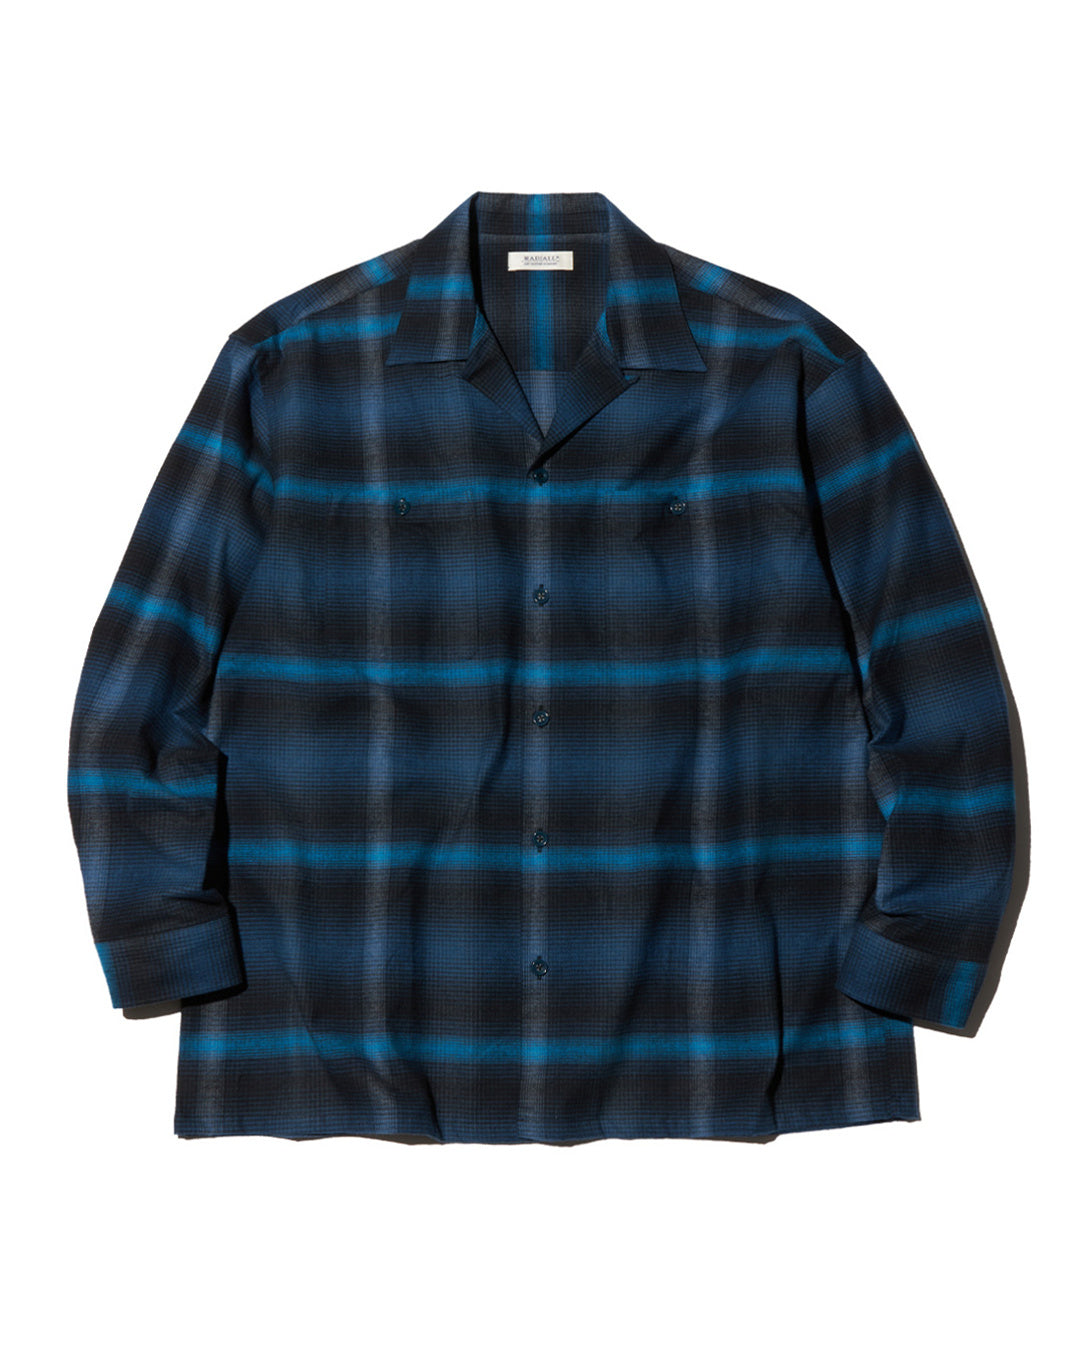 RADIALL | BOULEVARD - OPEN COLLARED SHIRT L/S - Blue ラディアル ...